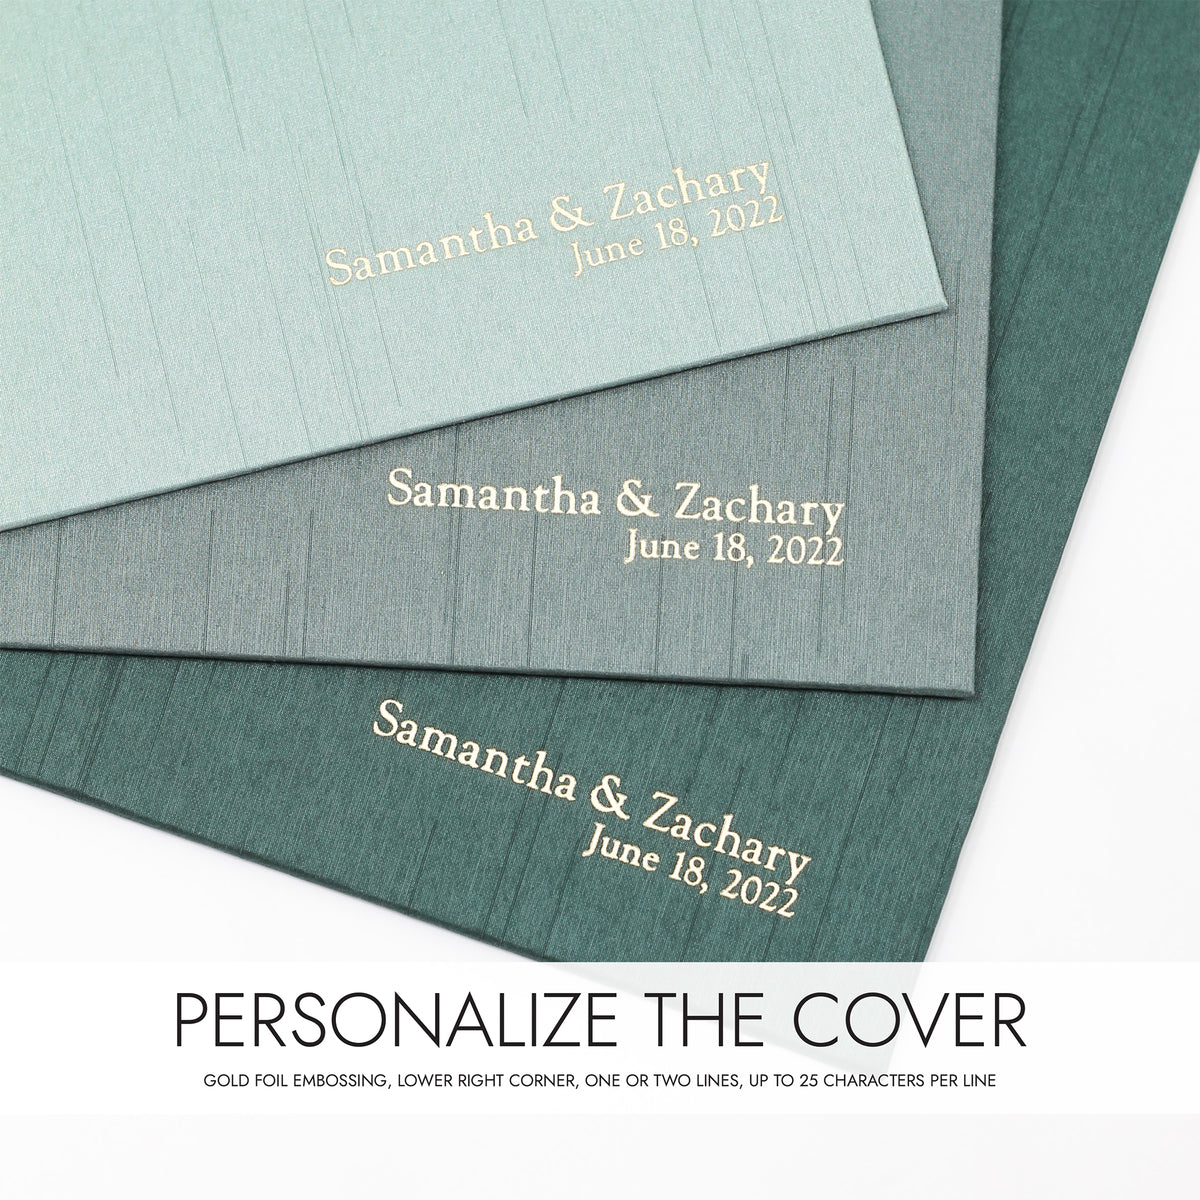 Event Guestbook Embossed with “Guests” with Emerald Silk Cover